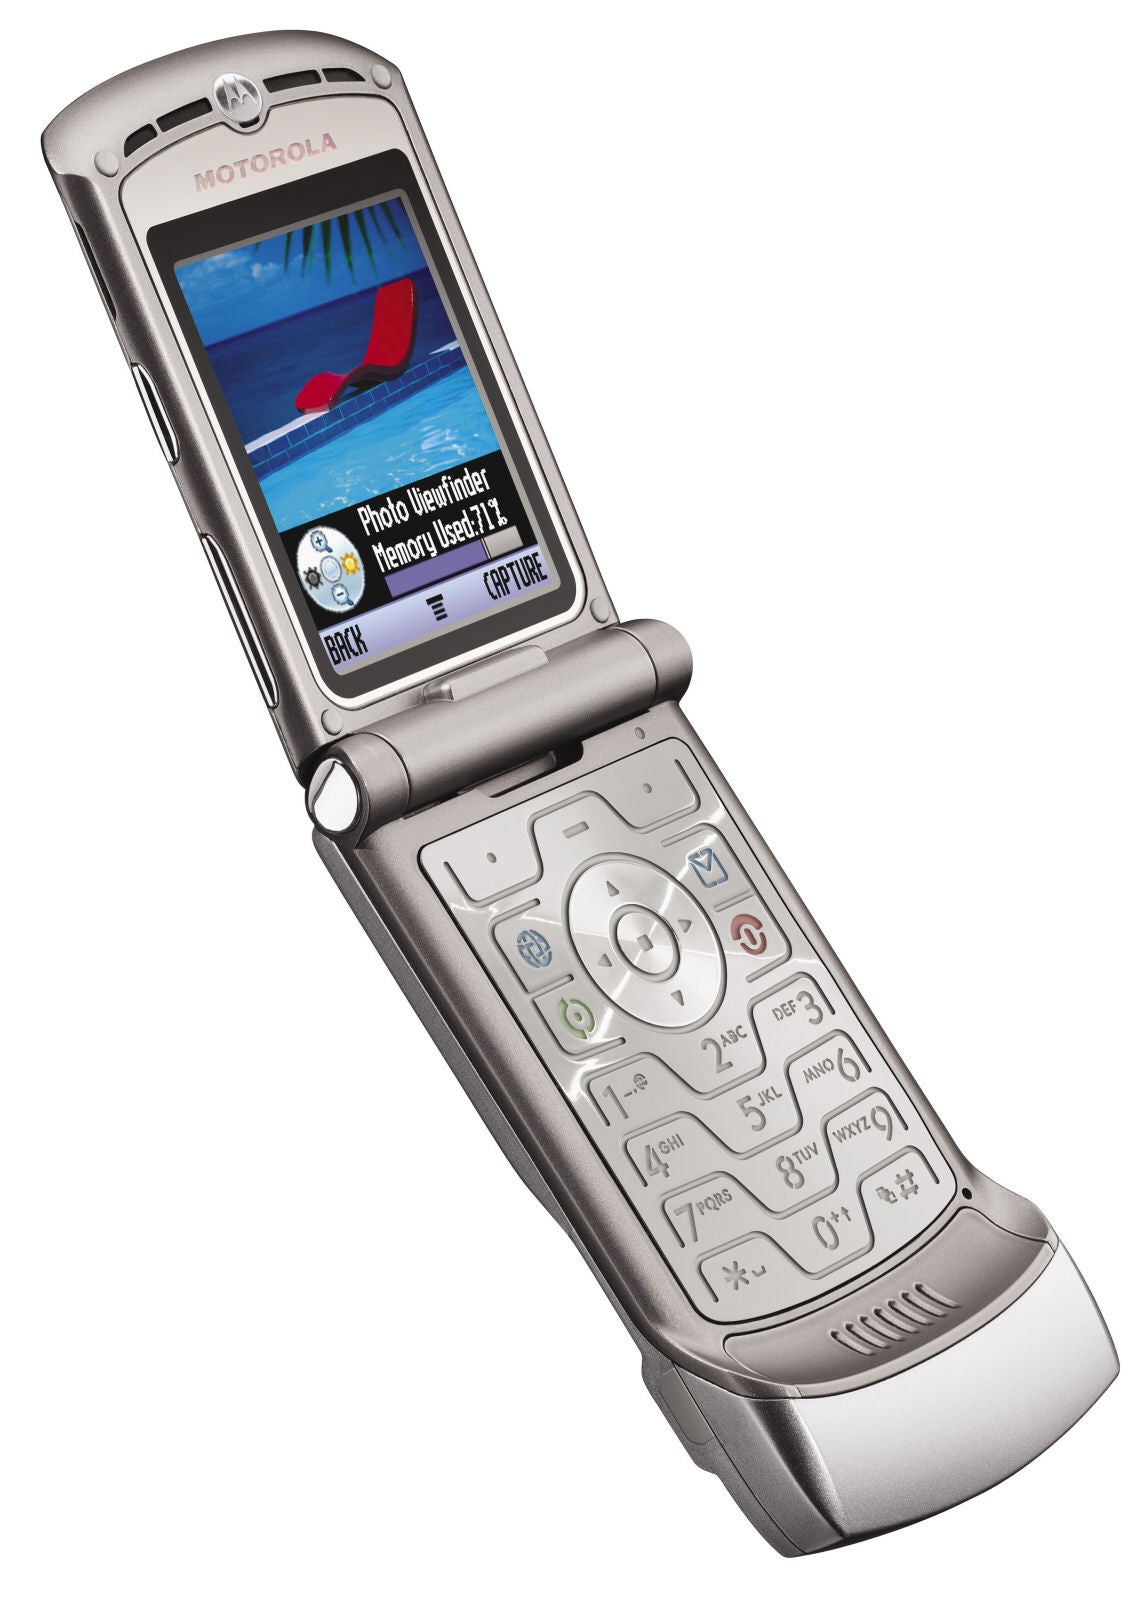 These were the best phones... before the iPhone